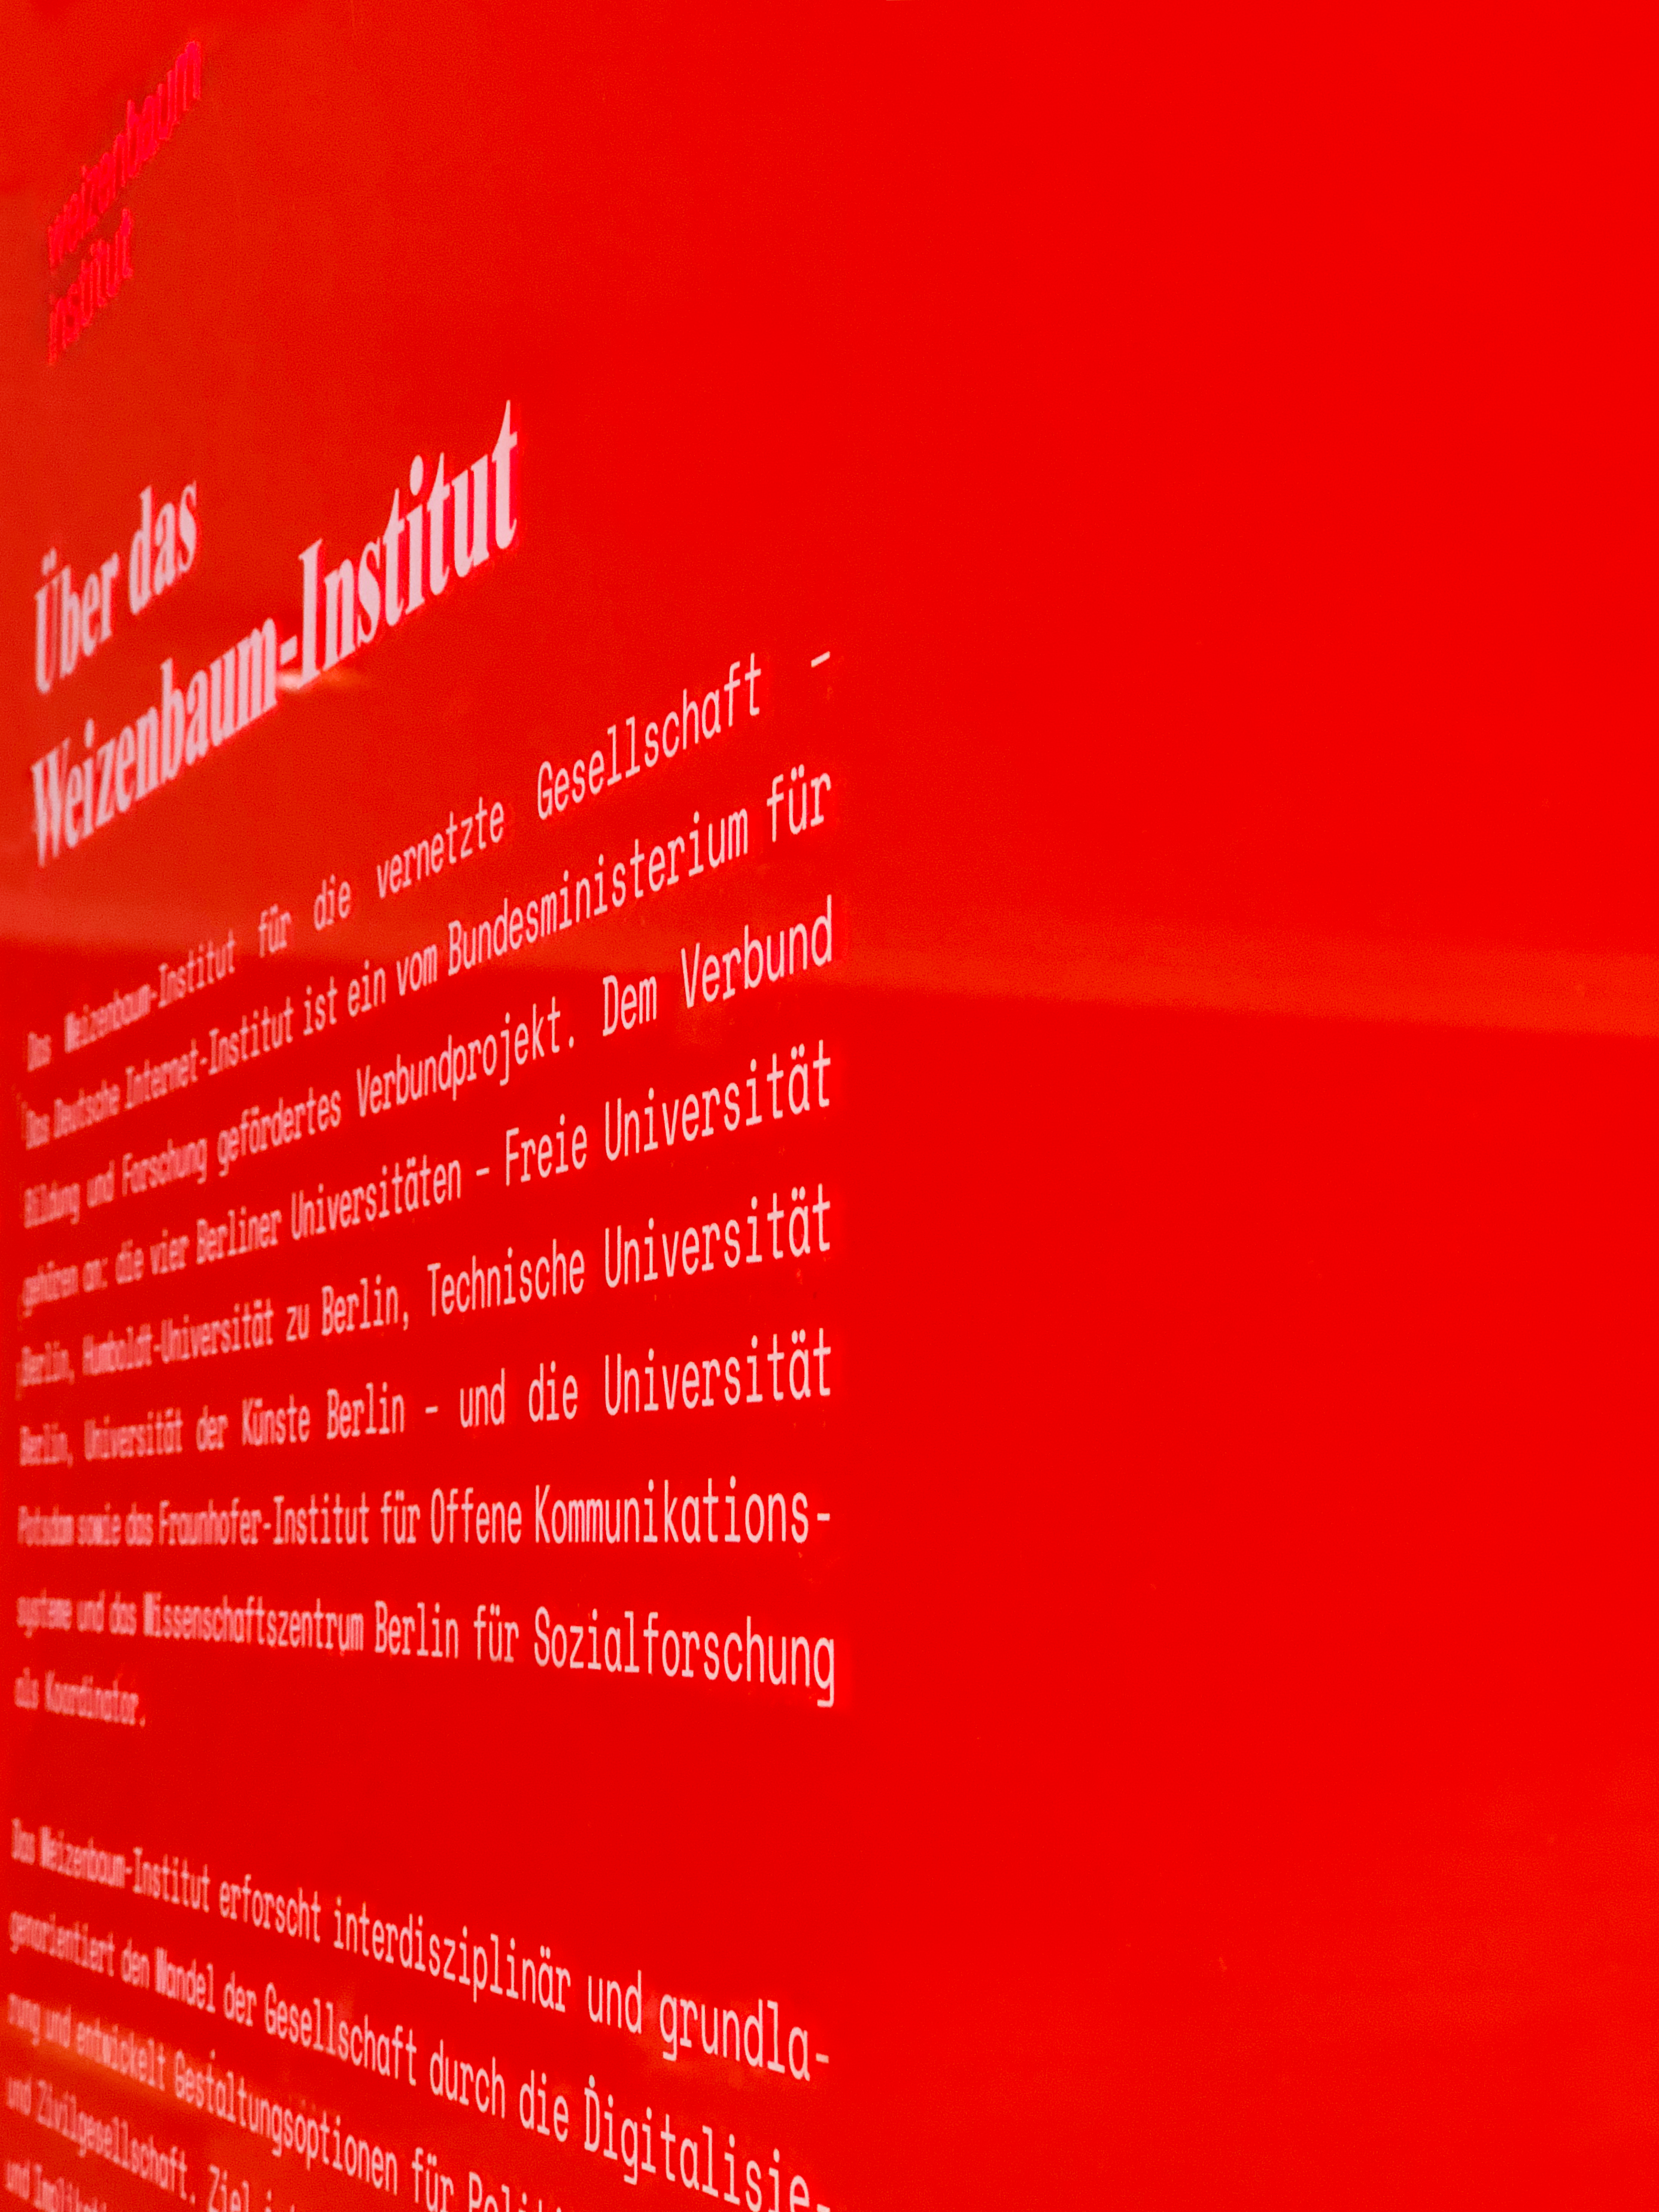 A photo taken from the side showcasing a semi-transparent red acrylic poster that features a title and 2 text paragraphs.